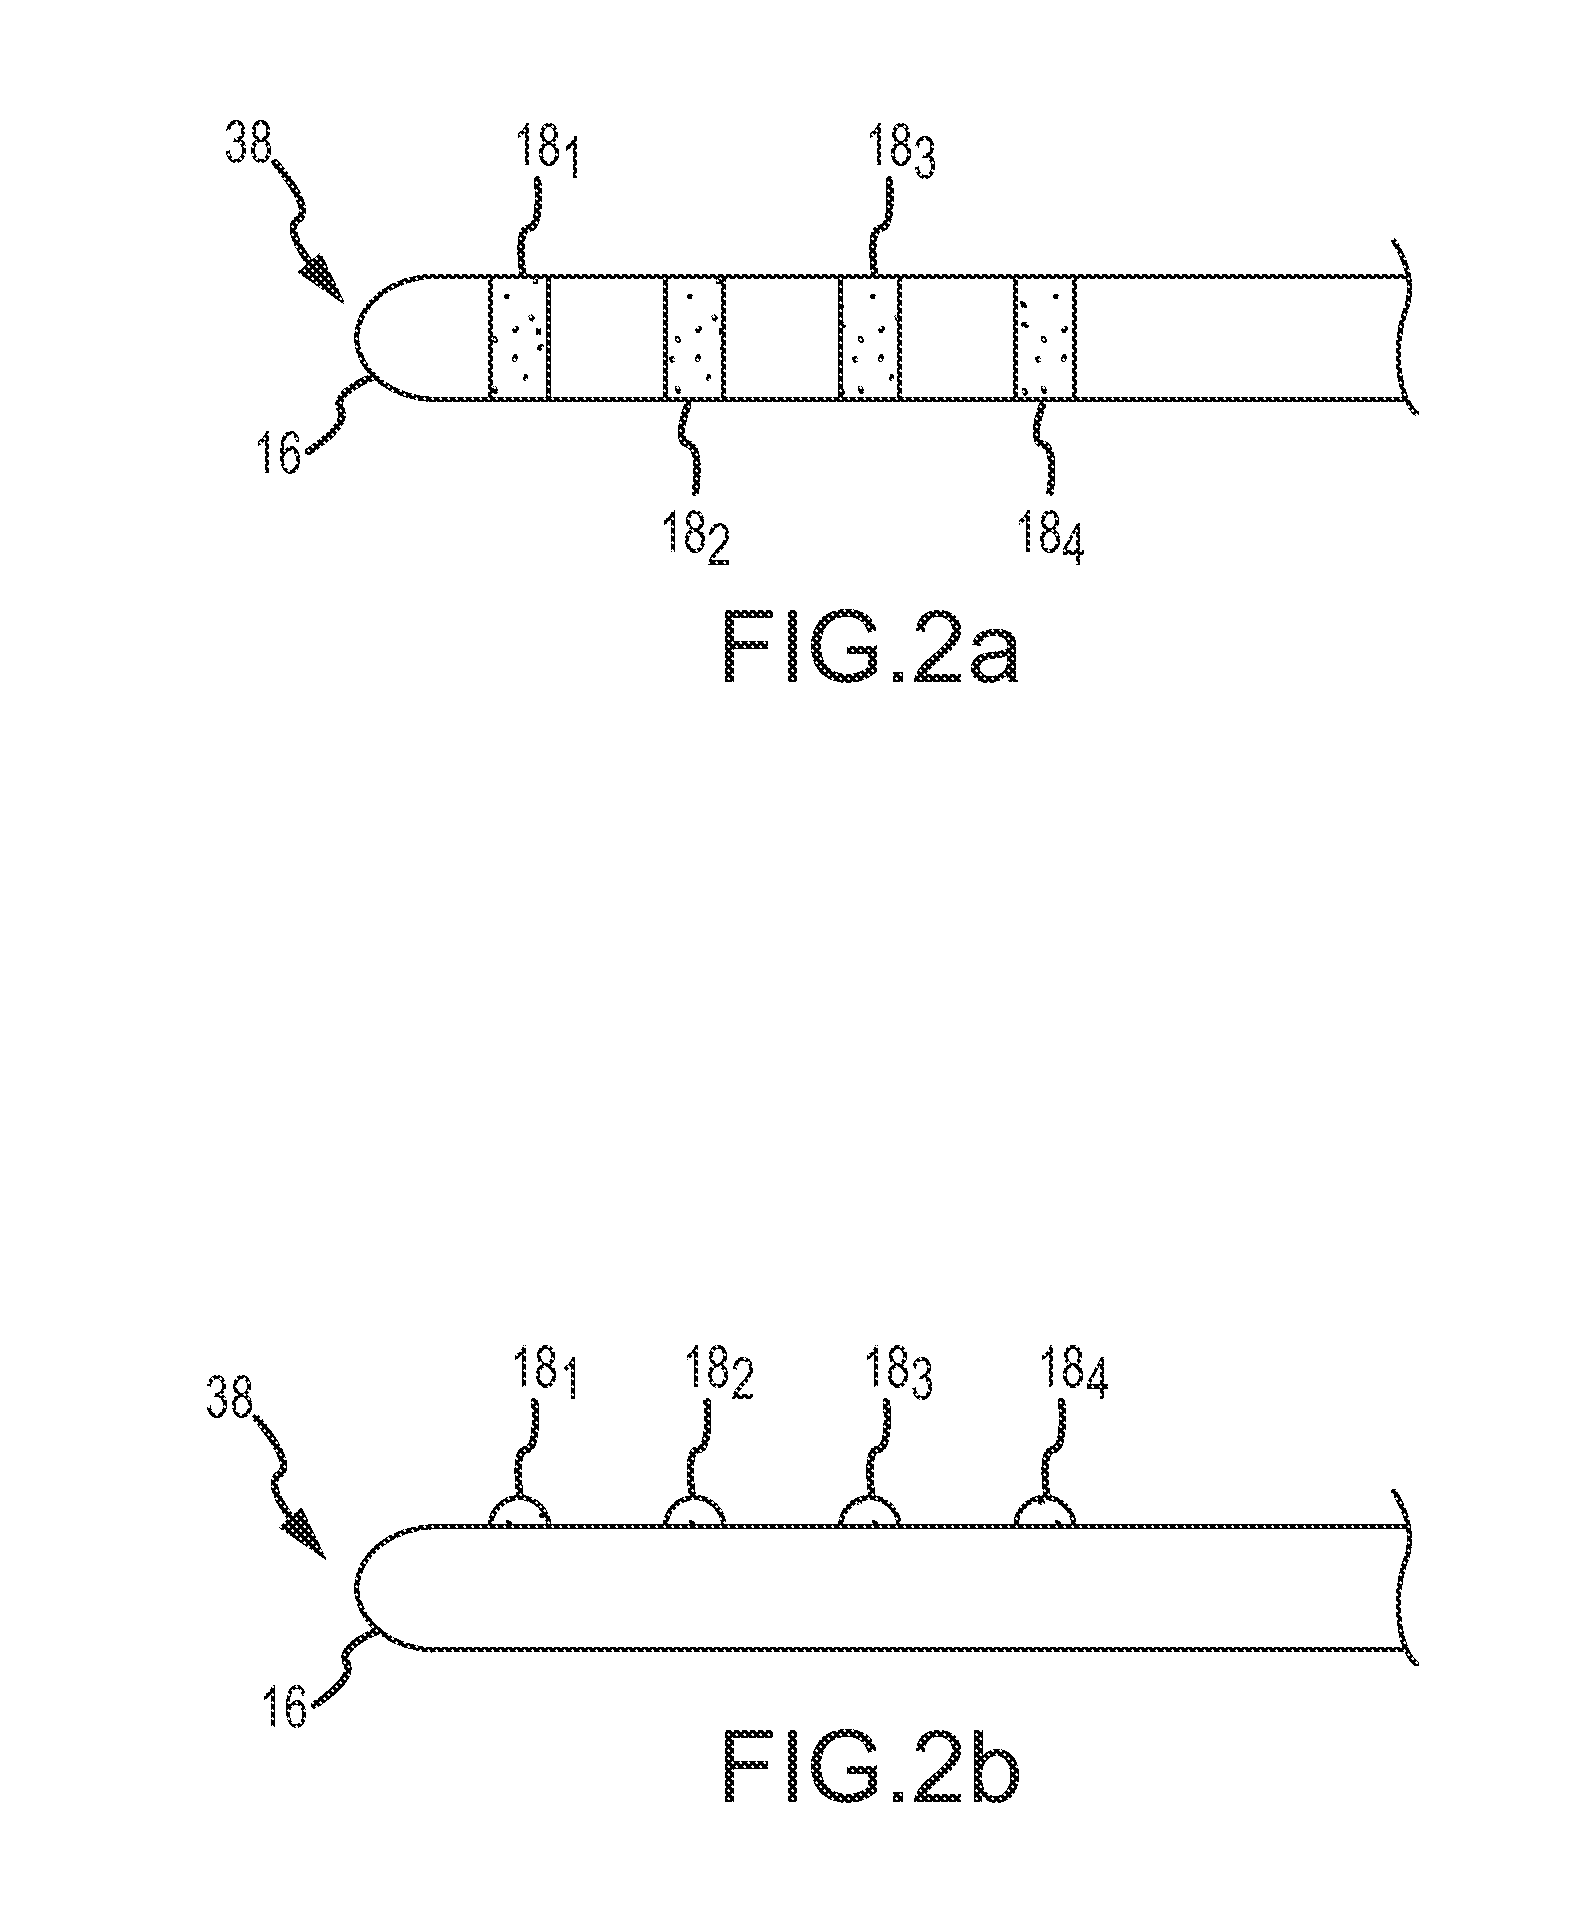 System and method for determining tissue type and mapping tissue morphology